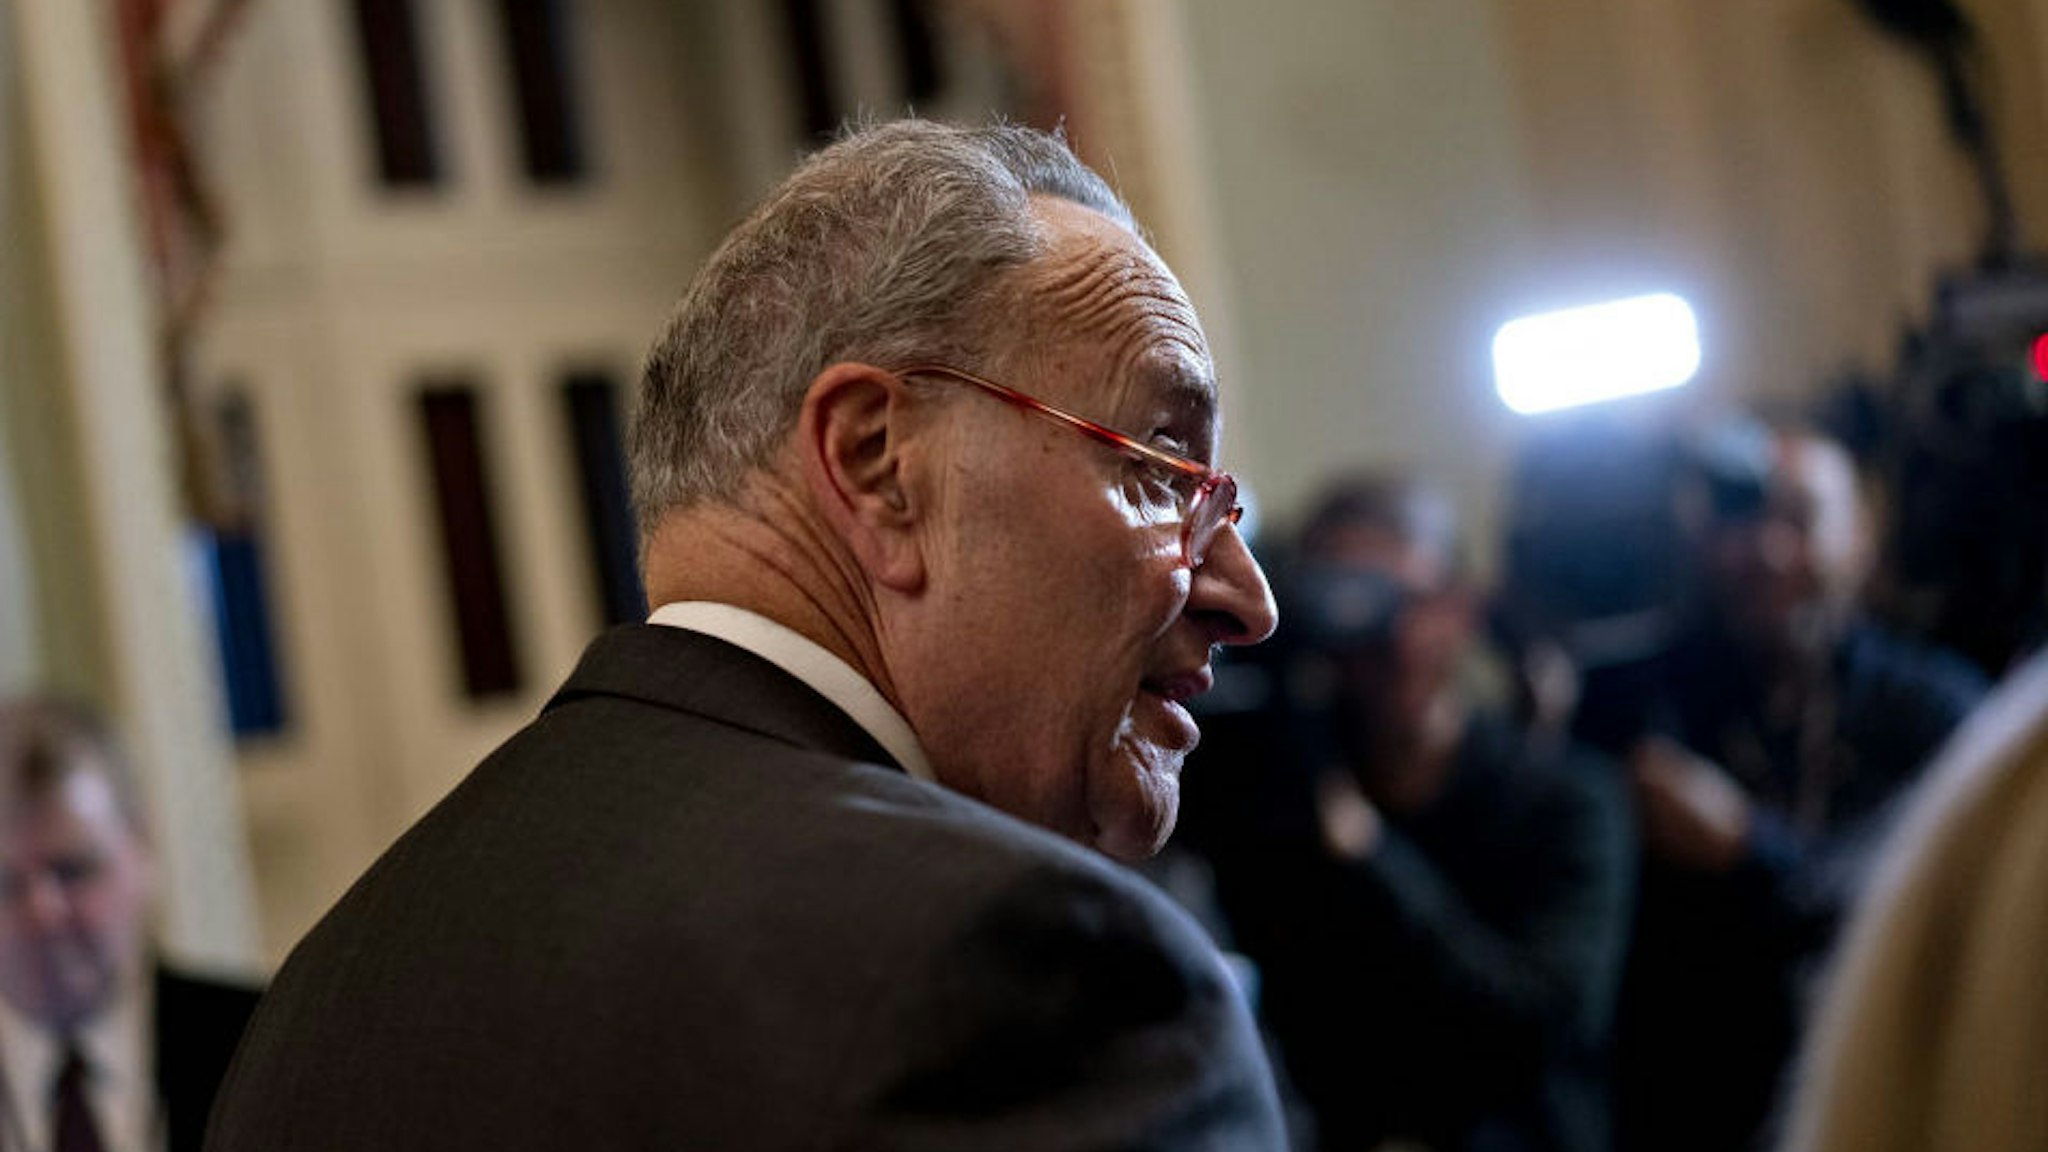 Senate Minority Leader Chuck Schumer, a Democrat from New York, speaks during a news conference after a weekly caucus meeting at the U.S. Capitol in Washington, D.C., U.S., on Tuesday, Dec. 17, 2019. Senate Majority Leader Mitch McConnell is setting a course to quash Democrat's attempts to extend the impeachment trial of President Donald Trump by calling new witnesses, with the goal of ending it swiftly in acquittal. Photographer: Andrew Harrer/Bloomberg